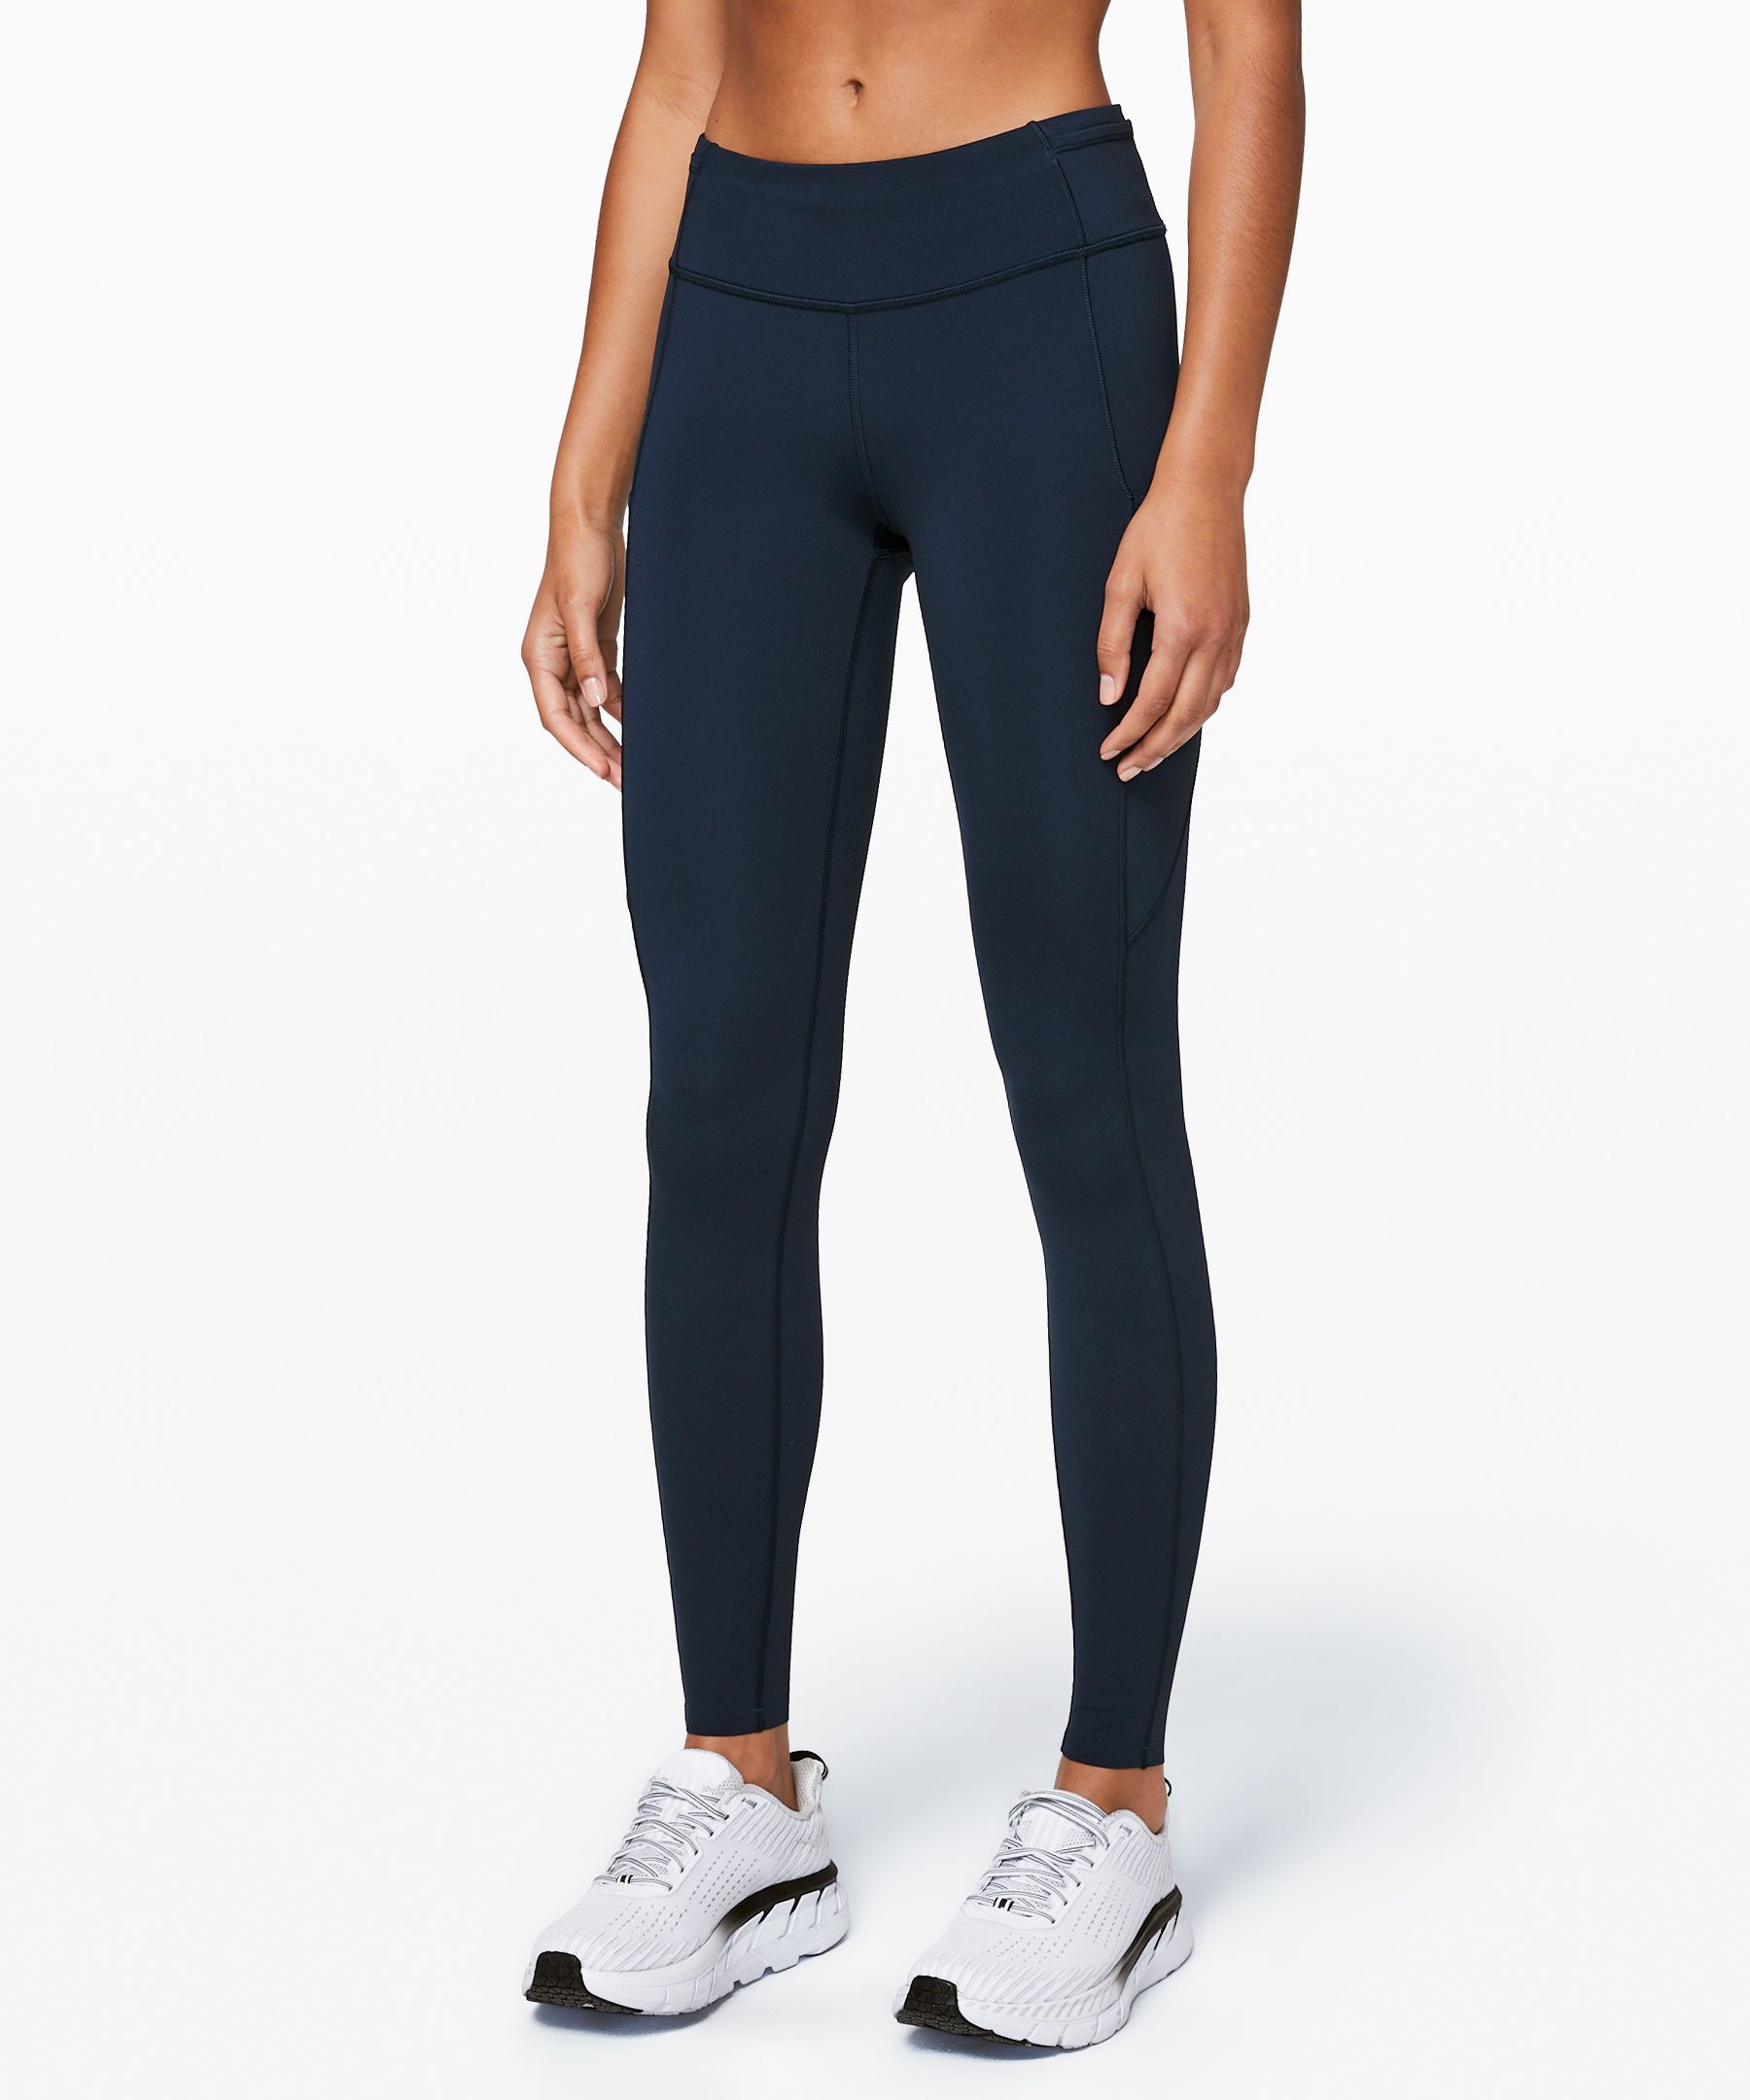 Lululemon Fast And Free Mid-rise Tight 28" *non-reflective Online Only In True Navy